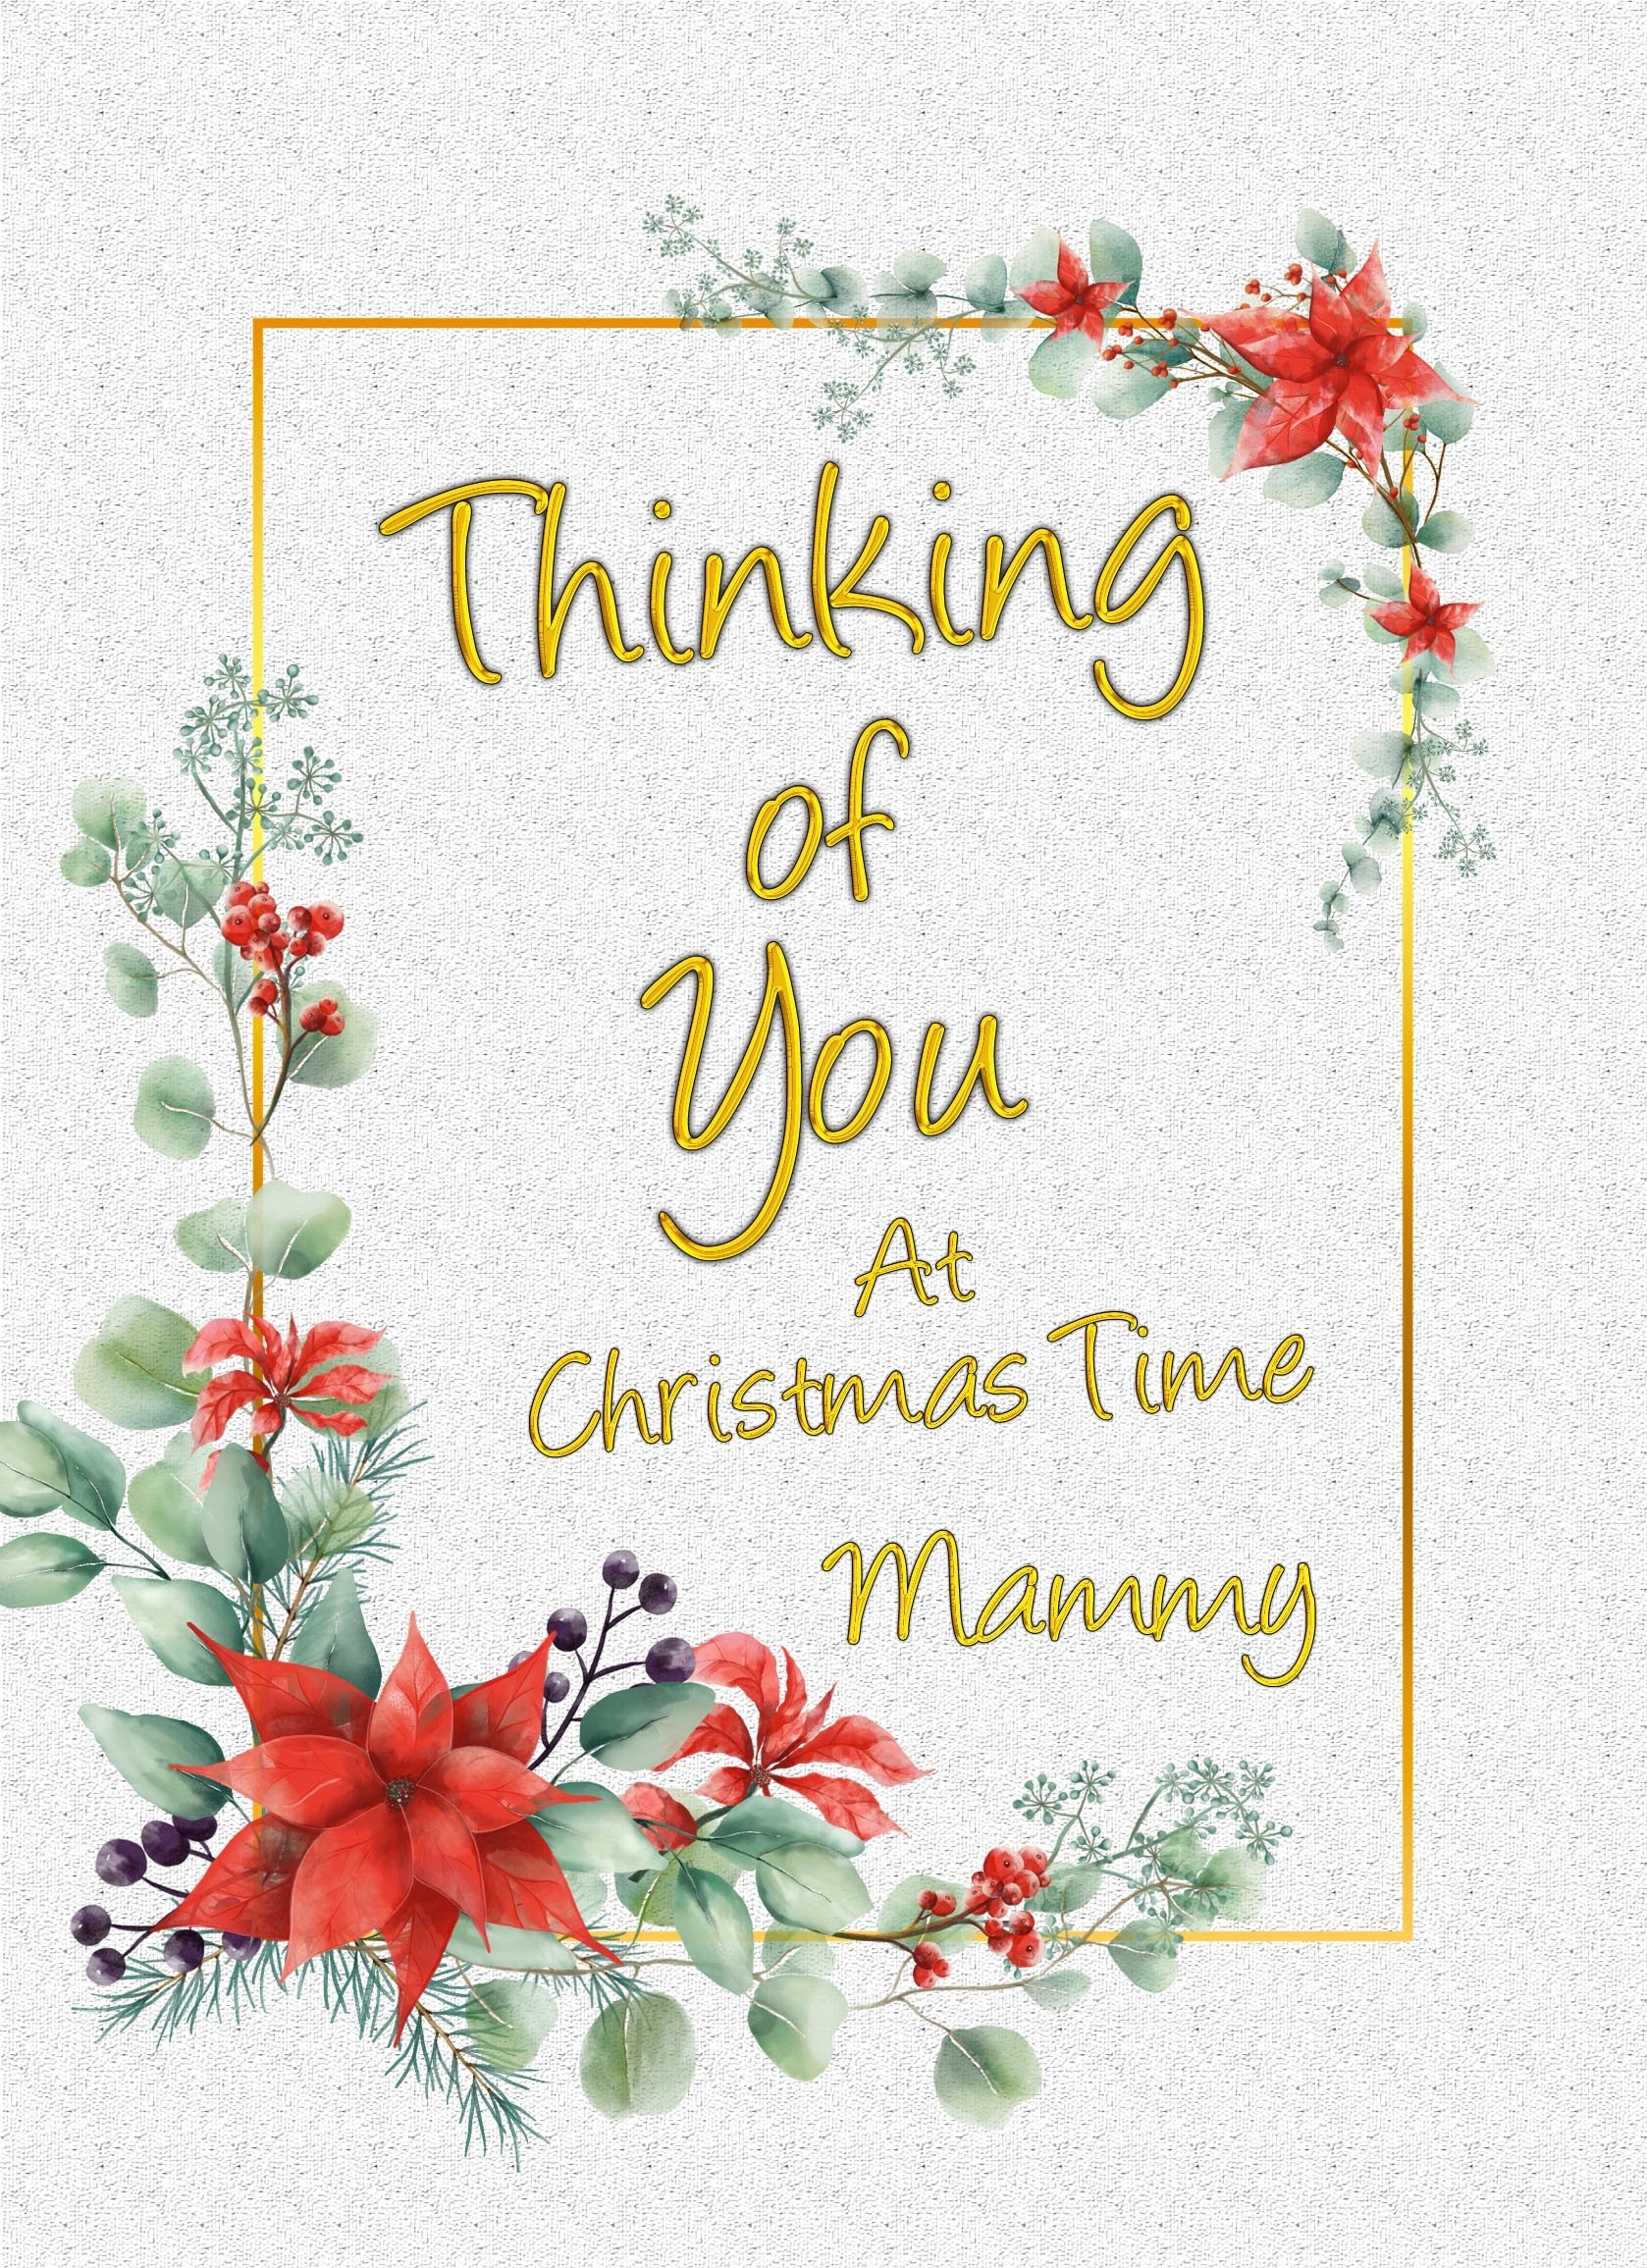 Thinking of You at Christmas Card For Mammy